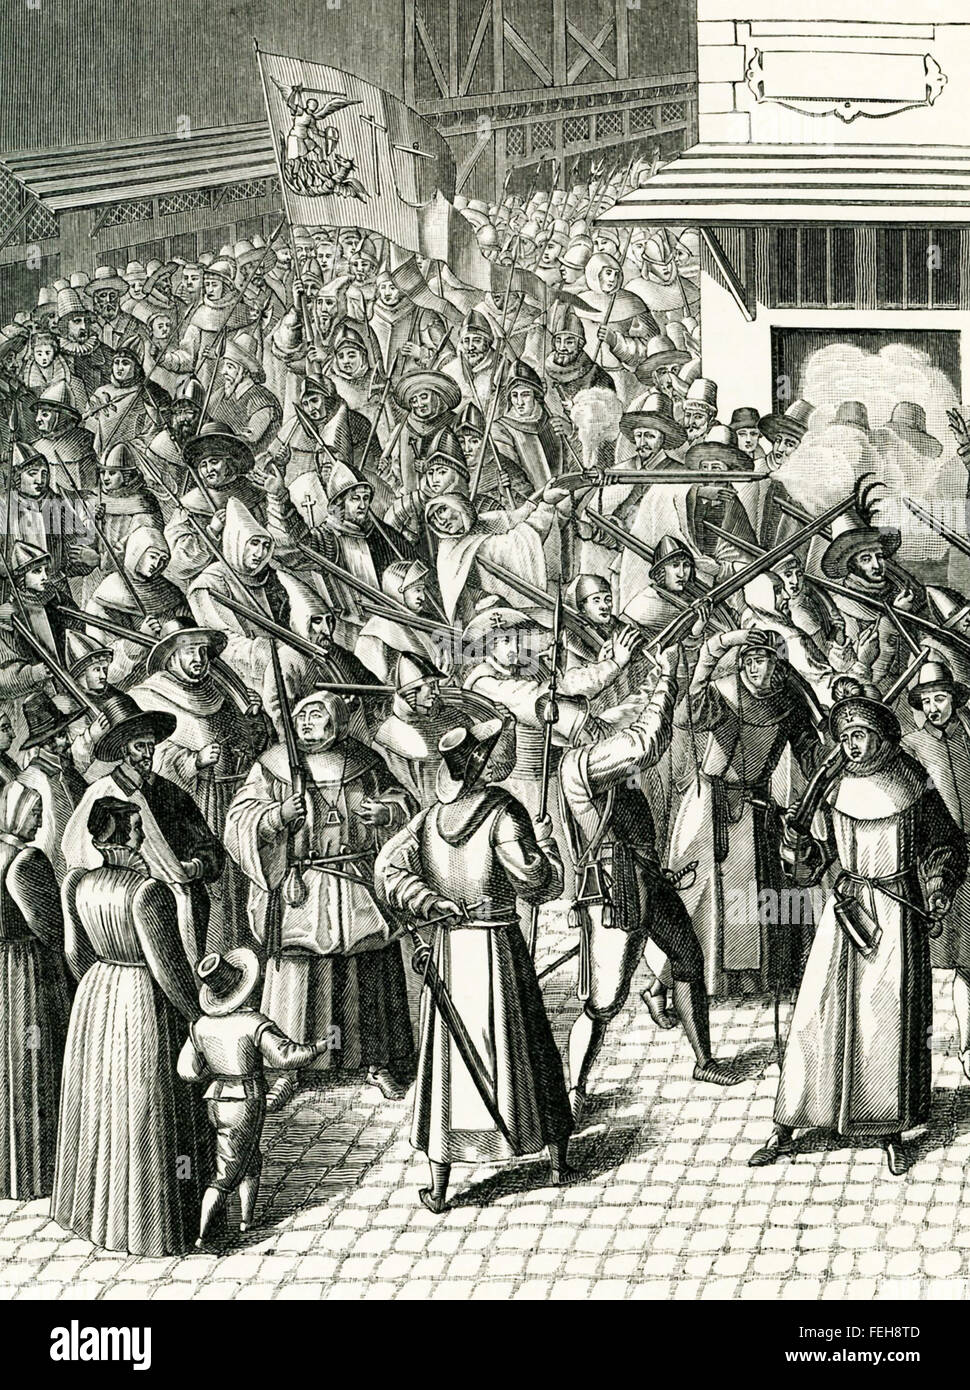 This 1800s engraving—on three boards— illustrates the 'Procession of the League.' The League referred to is the Catholic League,  also known as the Holy League. Here, the members are all shown armed and ready to do battle. The League was formed by he French Henry I, Duke of Guise, in 1576. It was the time of the Protestant Reformation, the Wars of Religions, and Henry I's intent was to eliminate Protestantism in France. Stock Photo